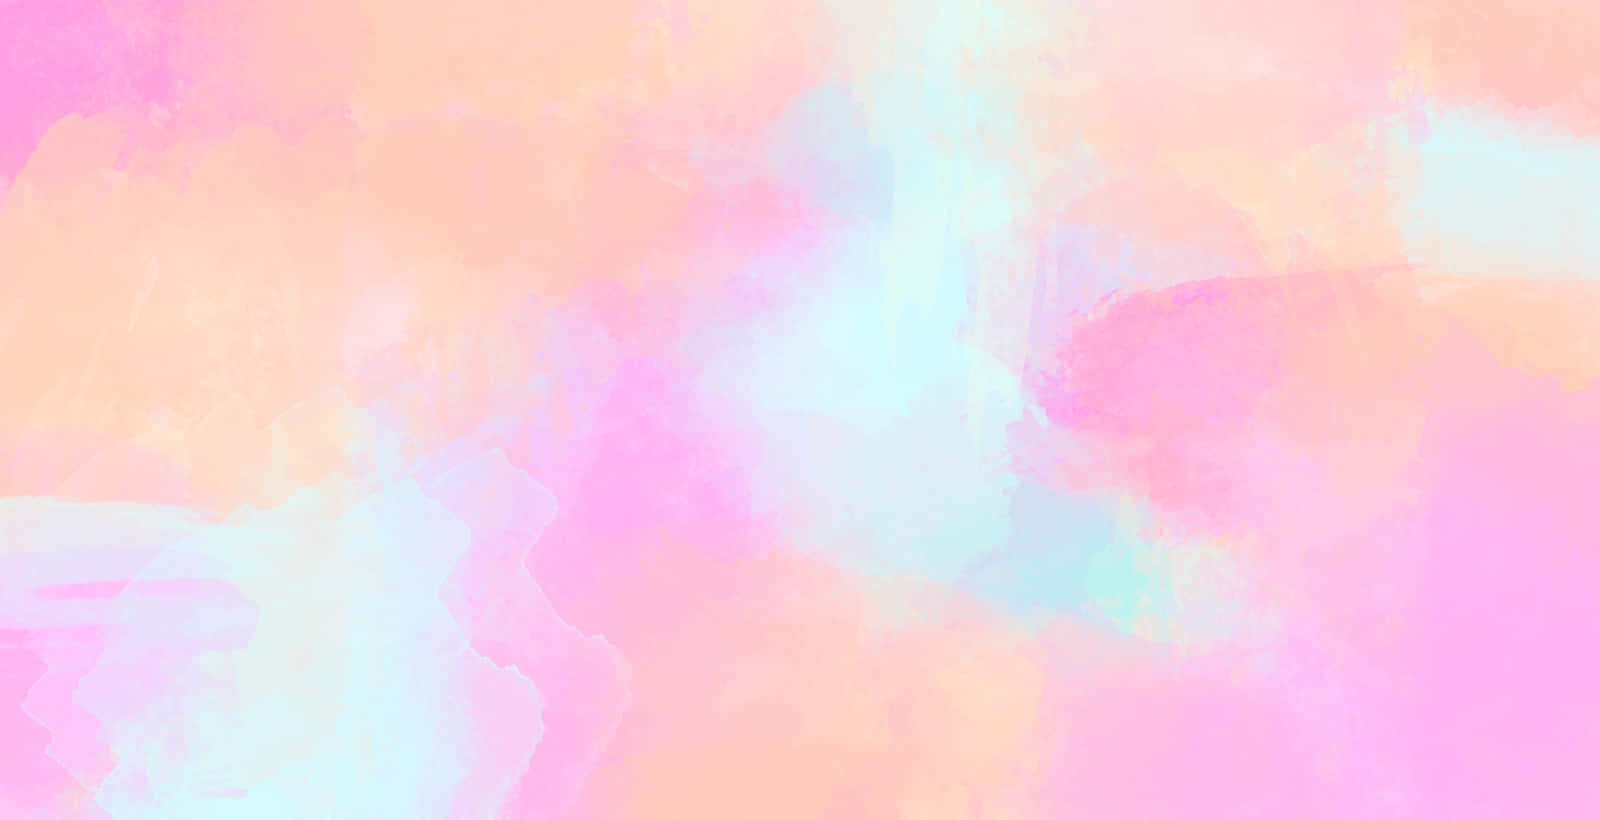 A Pink And Blue Abstract Painting Wallpaper